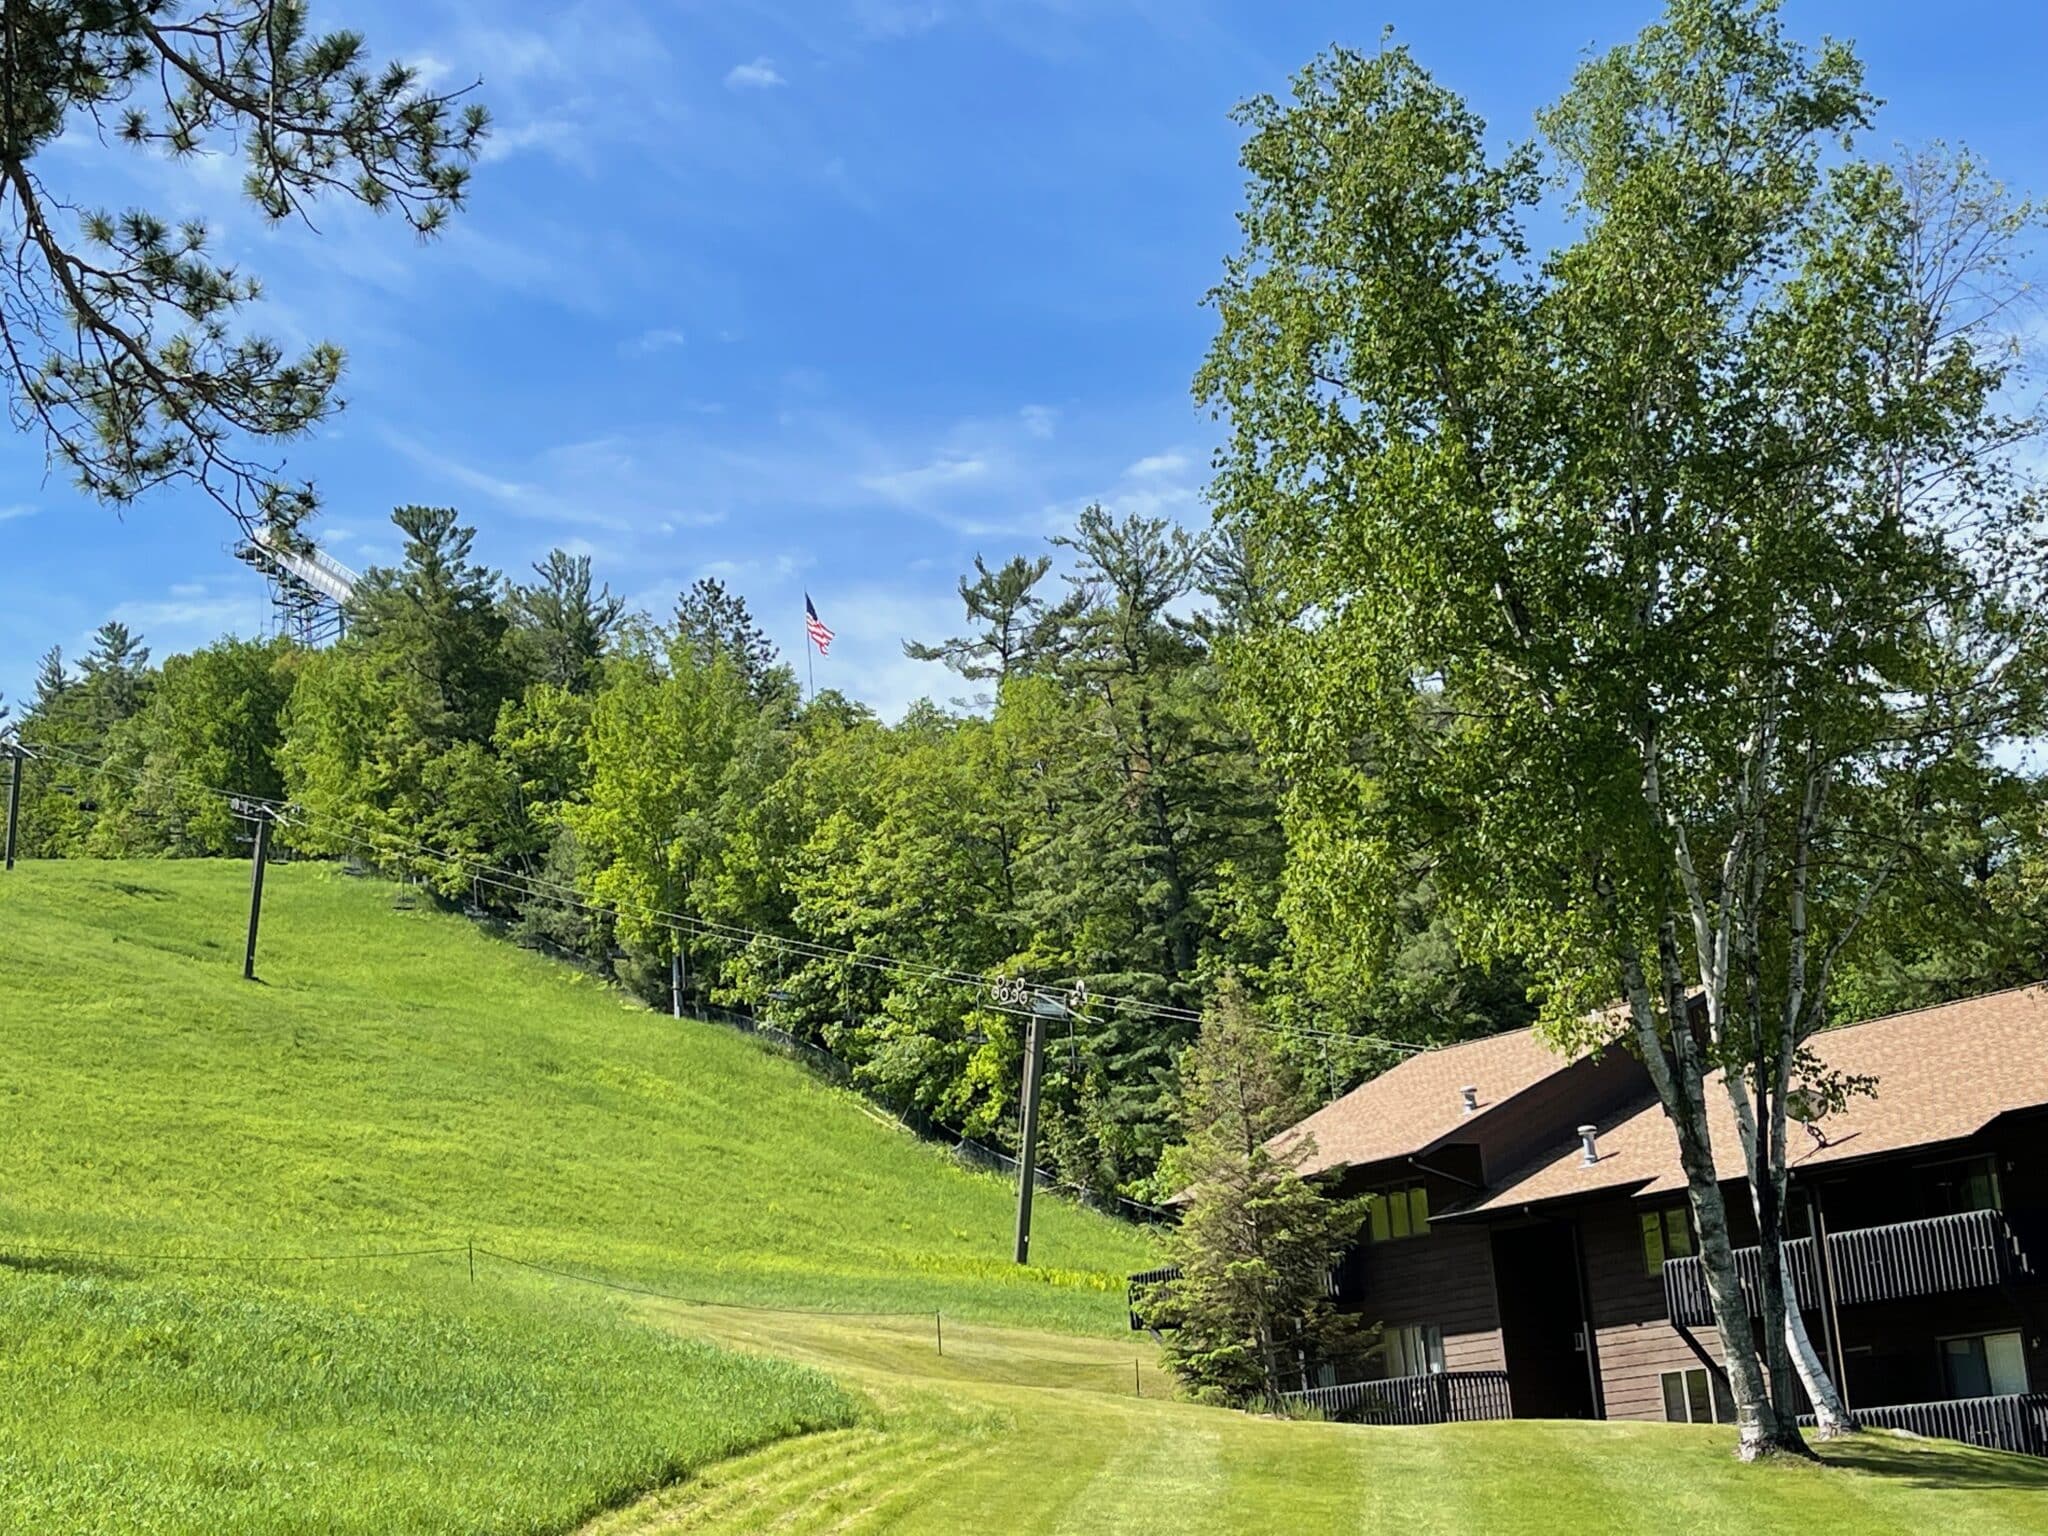 Ski jump and cottages on the hillside at Pine Mountain Resort